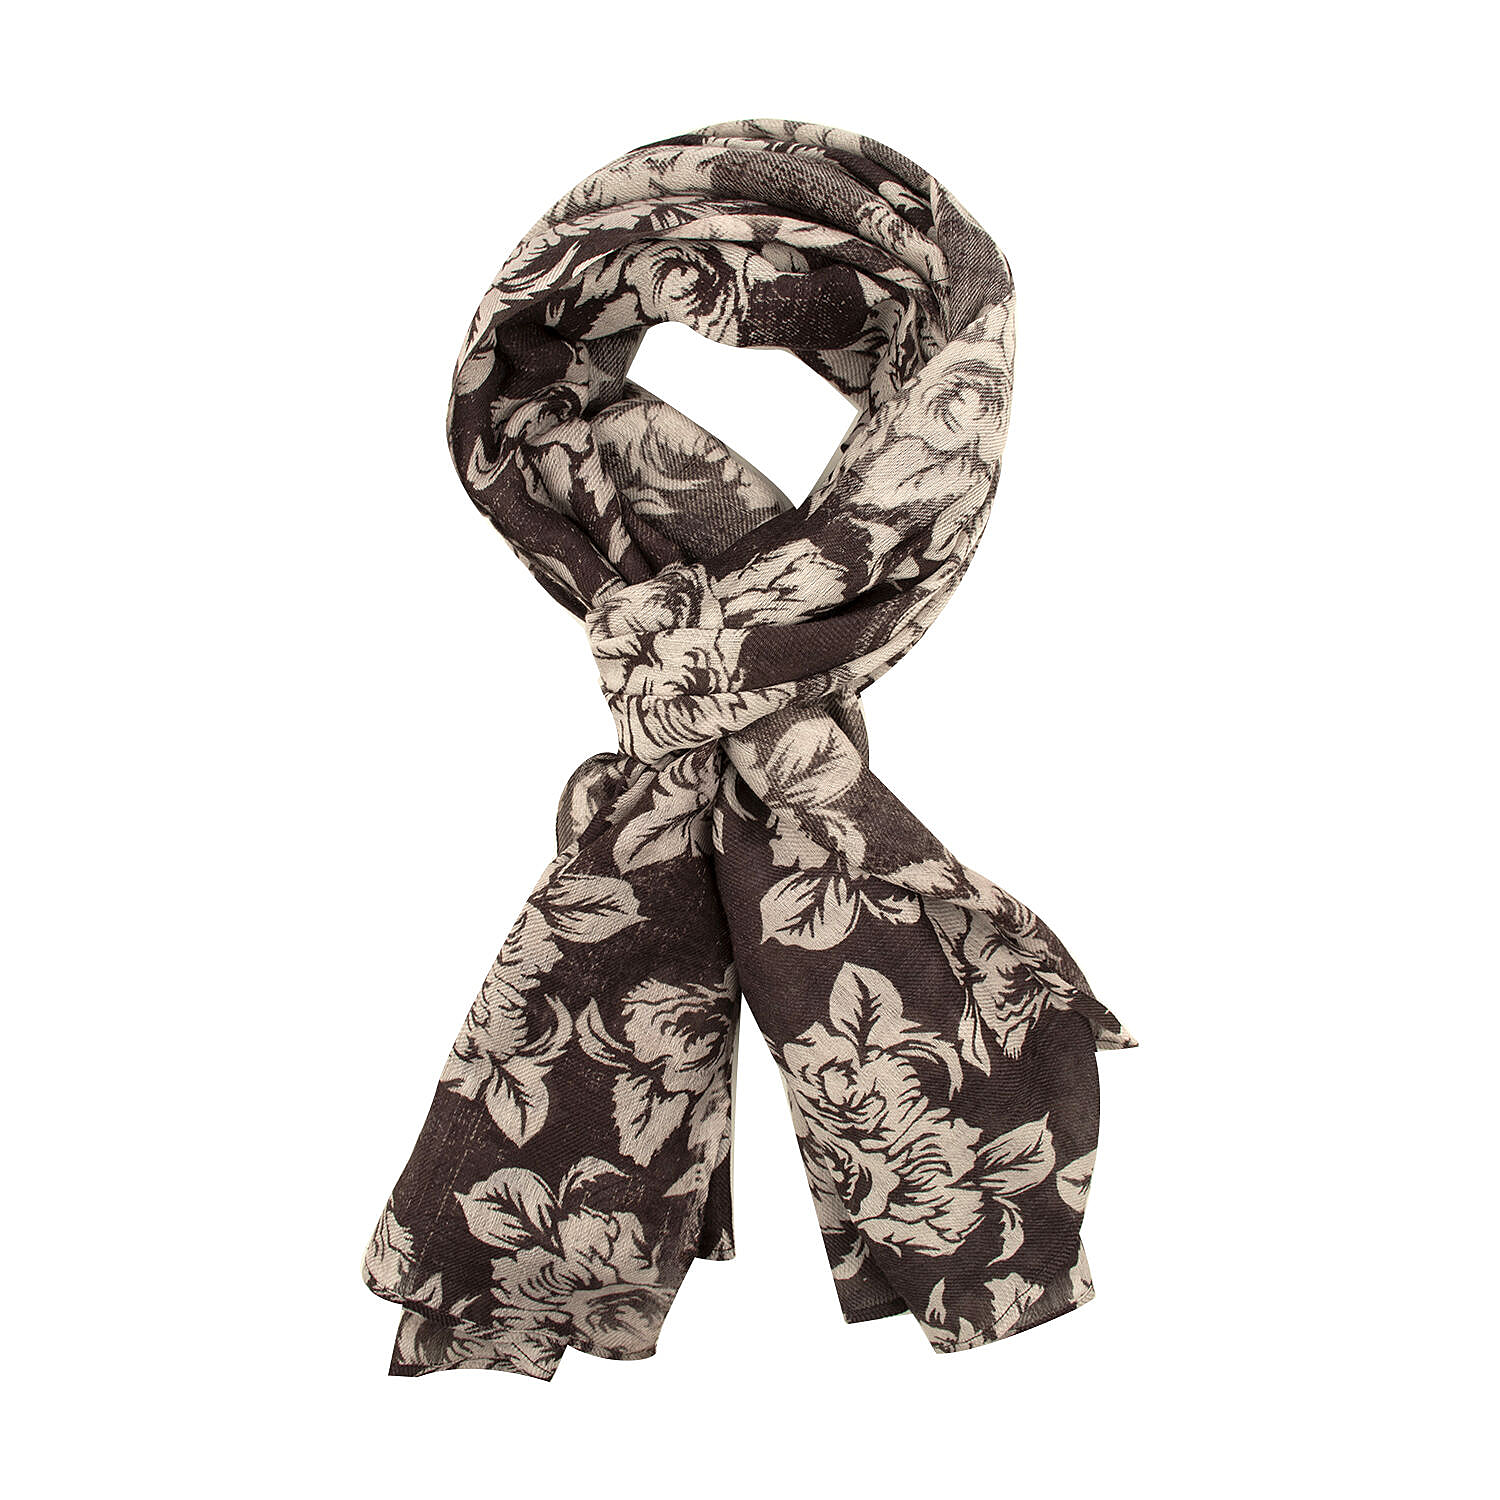 Tamsy-Cotton-Printed-Scarf-Size-180x75-cm-Brown-Beige